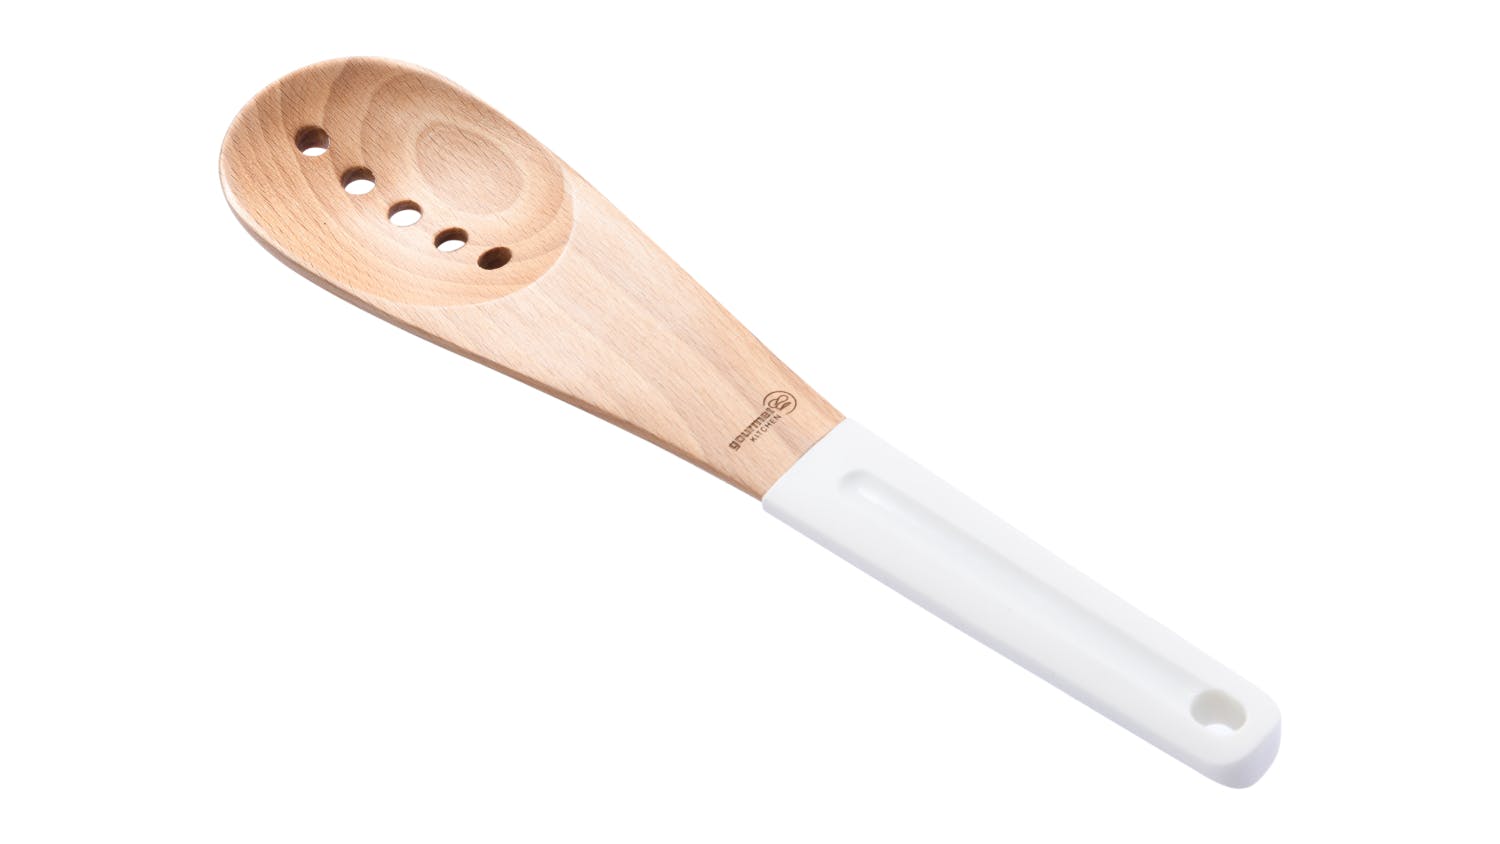 Gourmet Kitchen Wooden Slotted Spoon with Silicone Handle - Beech